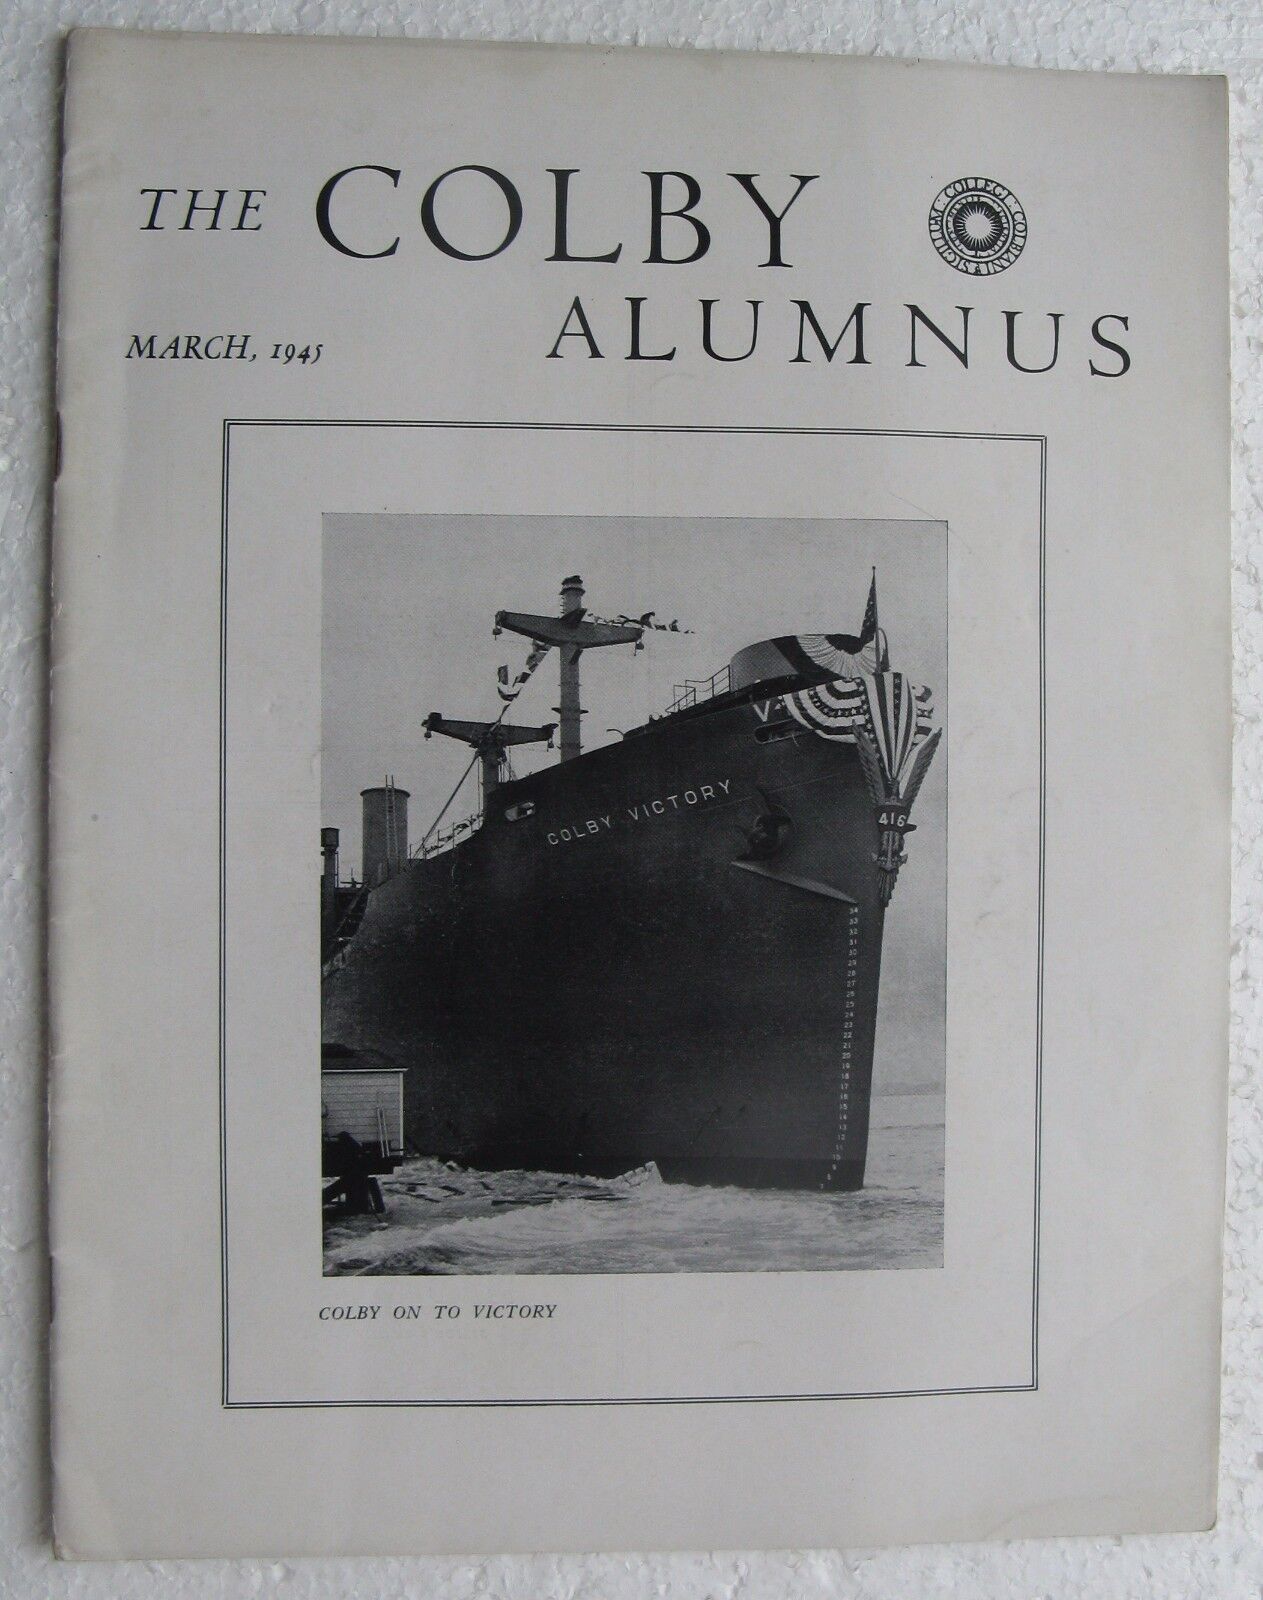 March 1945 The Colby Alumnus (SS Colby Victory on cover) College Alumni Magazine